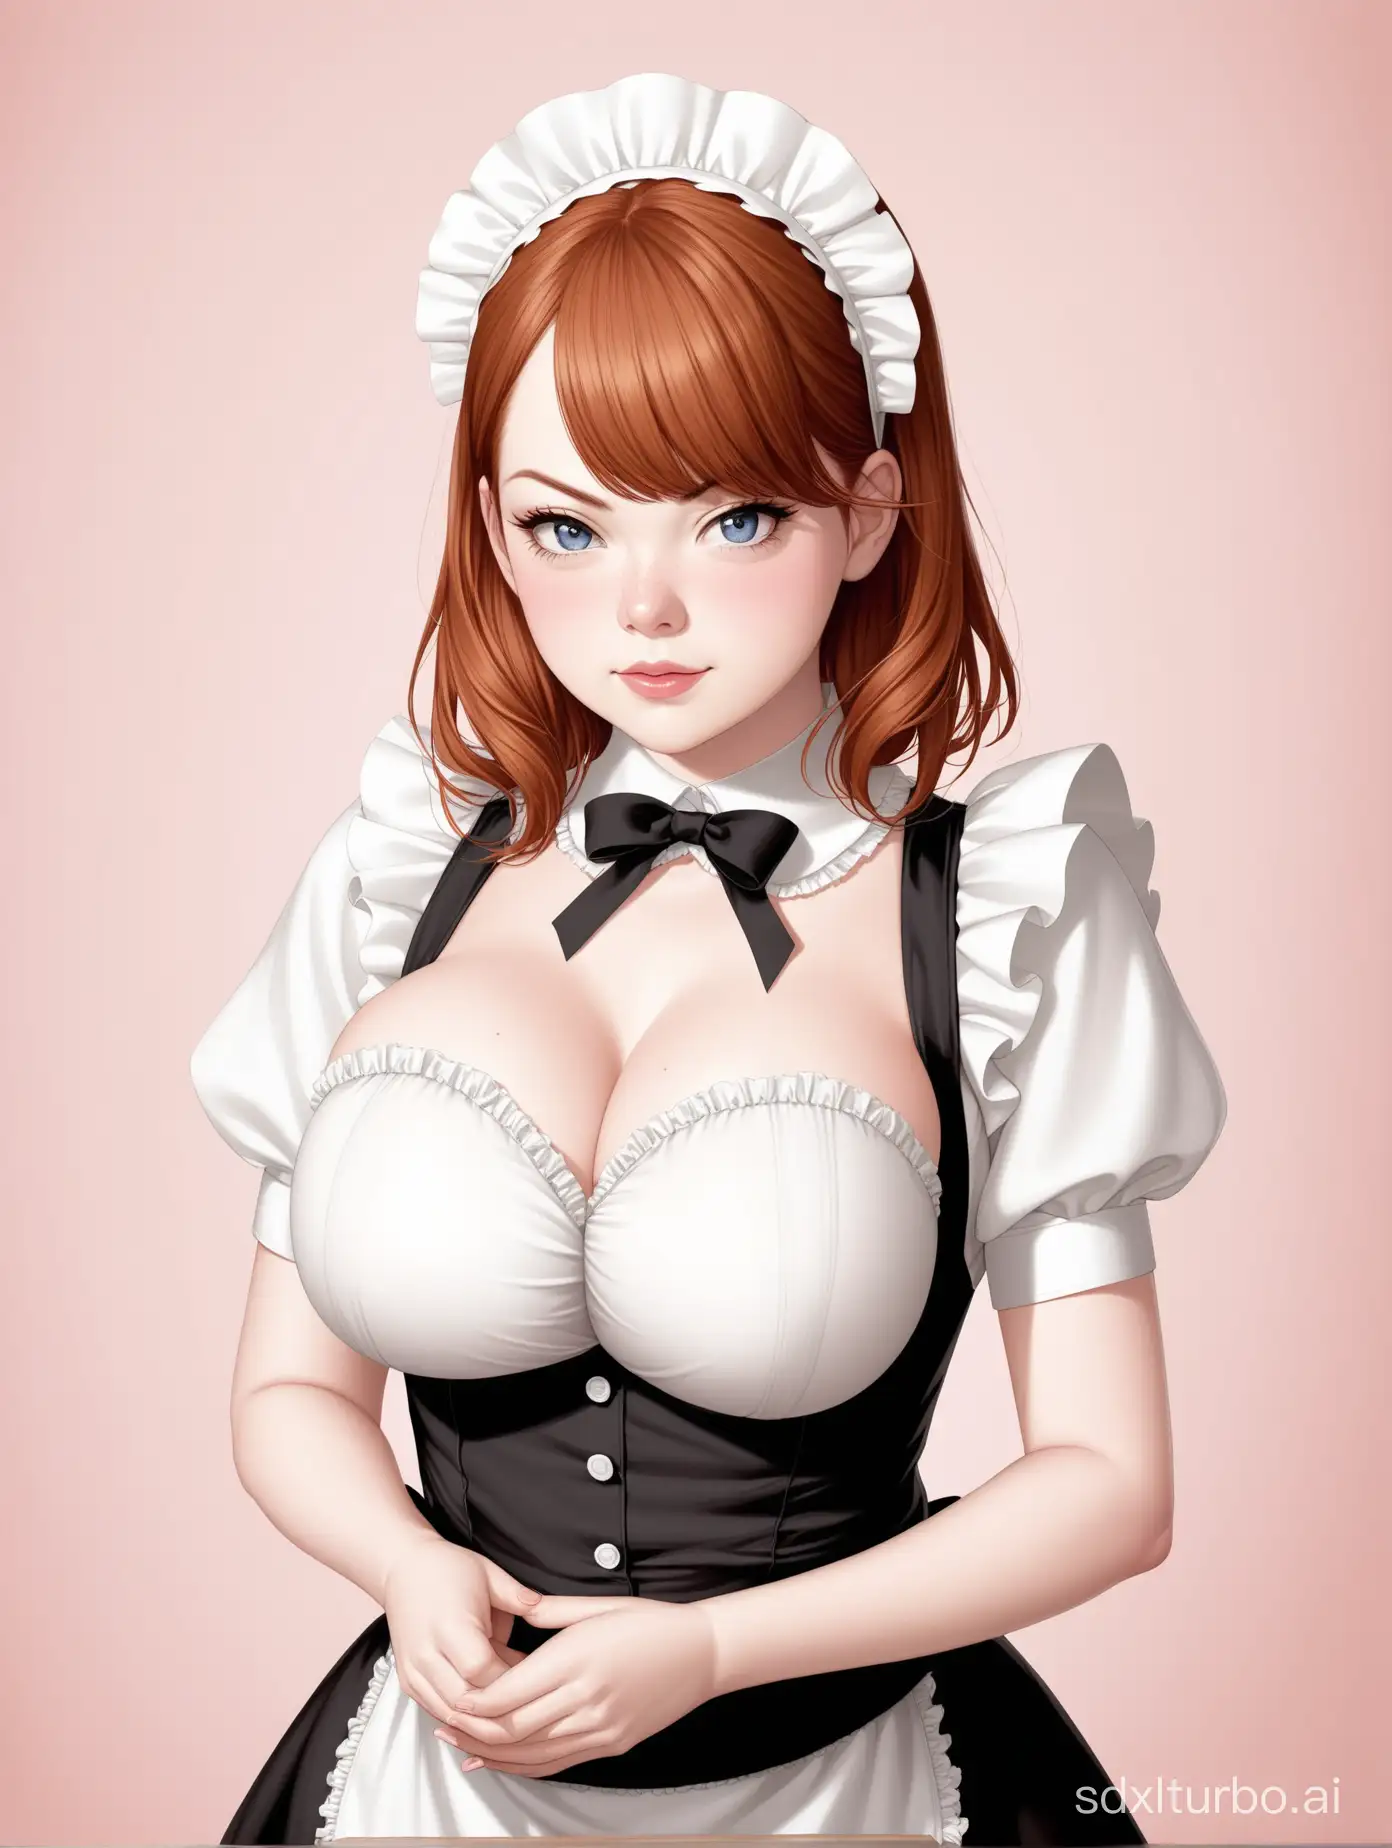 Seductive-Maid-Emma-Stone-Lookalike-with-Elegant-Dcolletage-in-Loretta-Lux-Inspired-Photograph